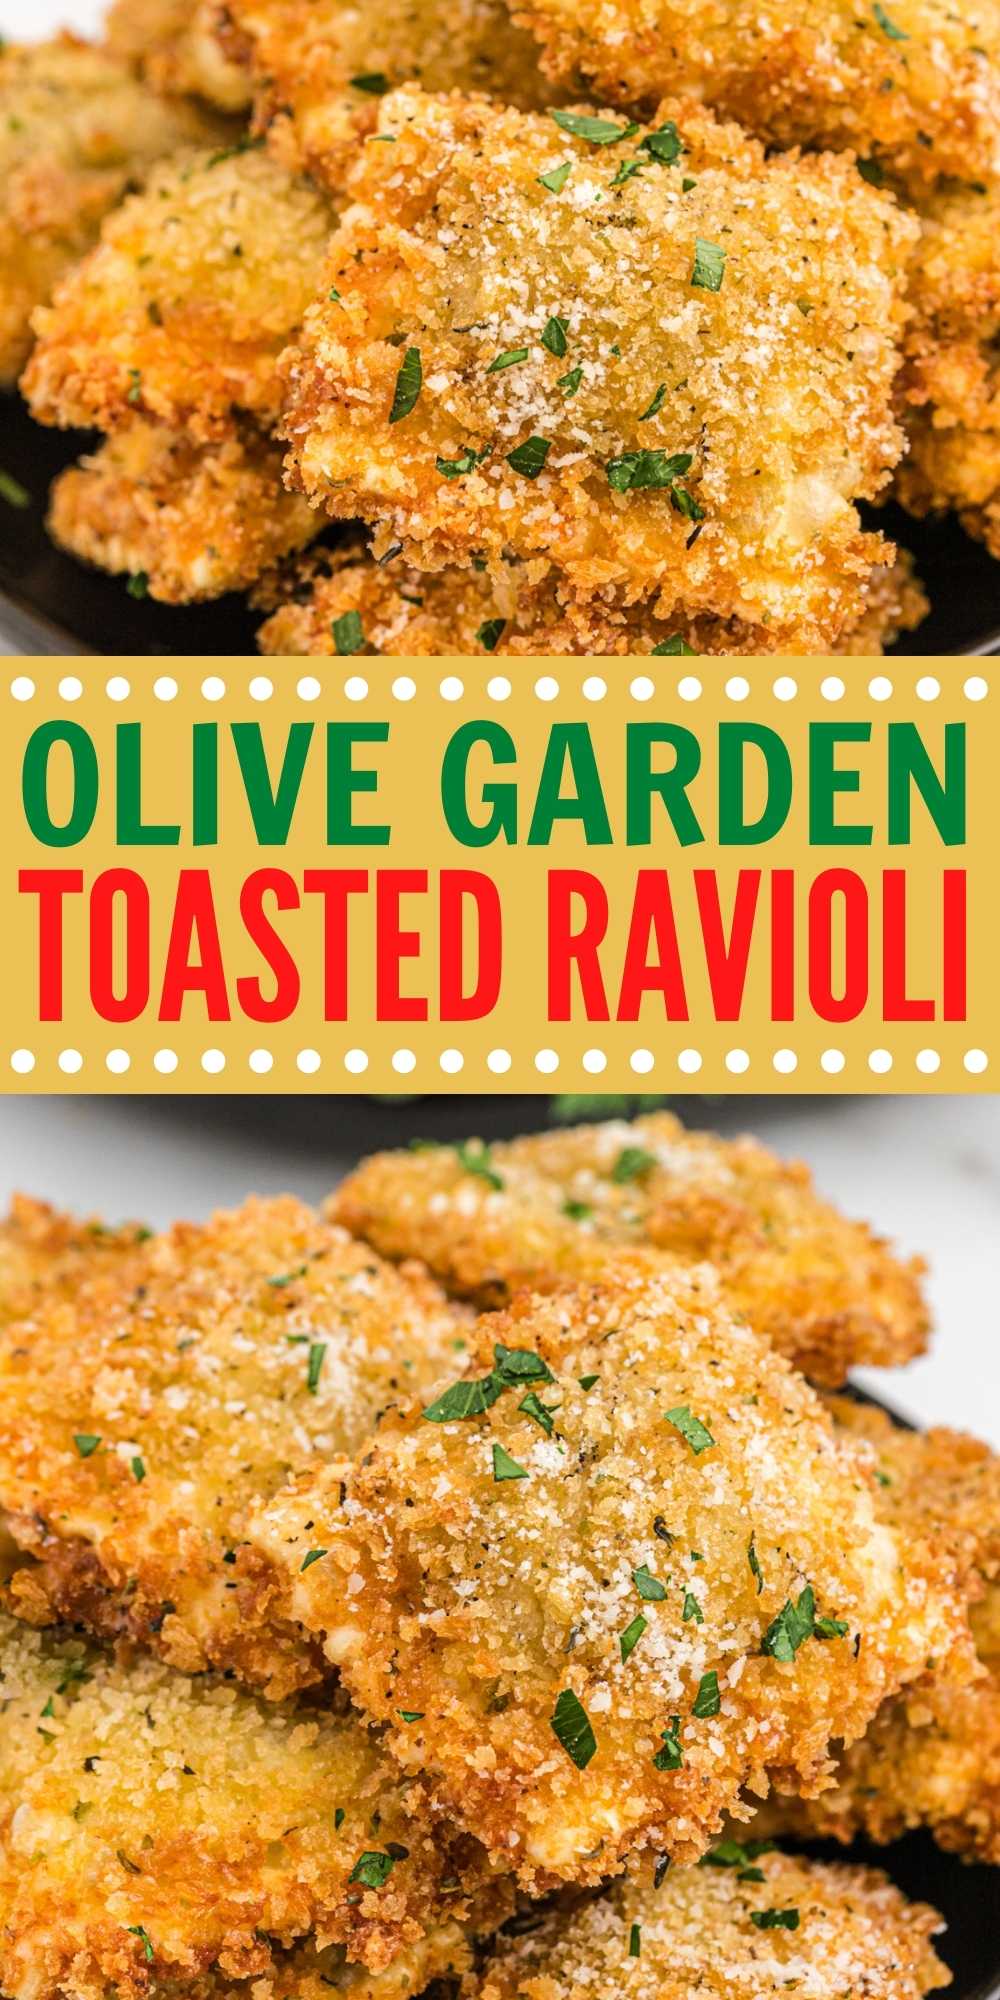 Olive Garden Toasted Ravioli is a family favorite appetizer. This copycat recipe is easily made at home with simple ingredients. Make your favorite Olive Garden appetizer at home with this easy toasted ravioli recipe. #eatingonadime #toastedravioli #olivegarden #copycatrecipes